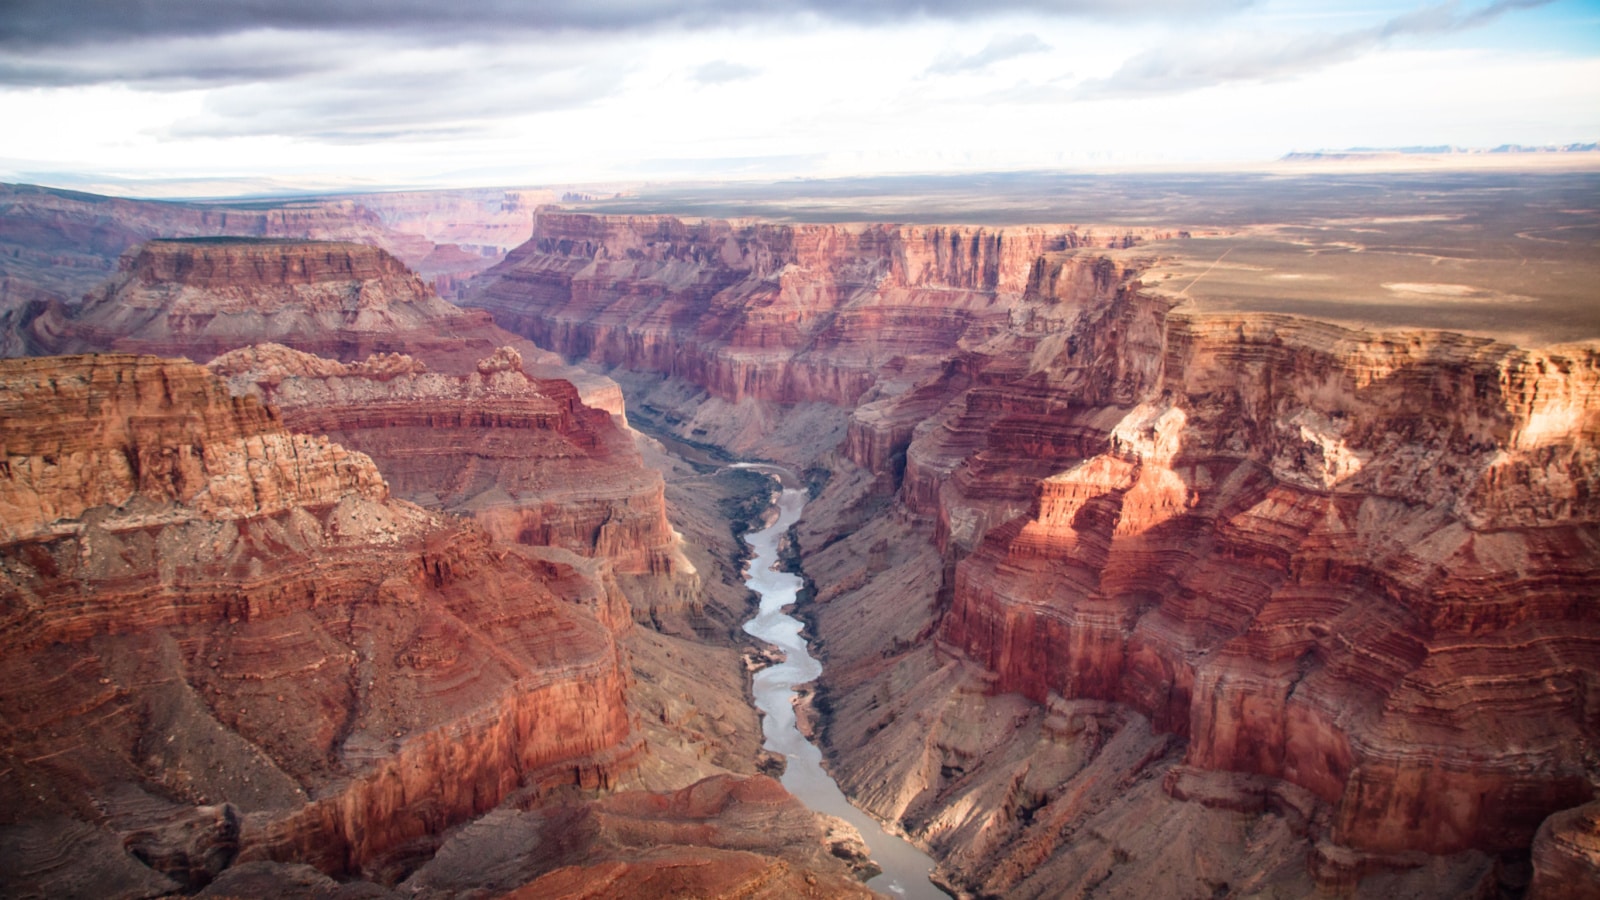 <p>The Grand Canyon is a massive and iconic natural landmark located in the state of Arizona, United States. It is a steep-sided canyon carved by the Colorado River over millions of years. Known for its breathtaking beauty and geological significance, the Grand Canyon attracts millions of visitors from around the world.</p>